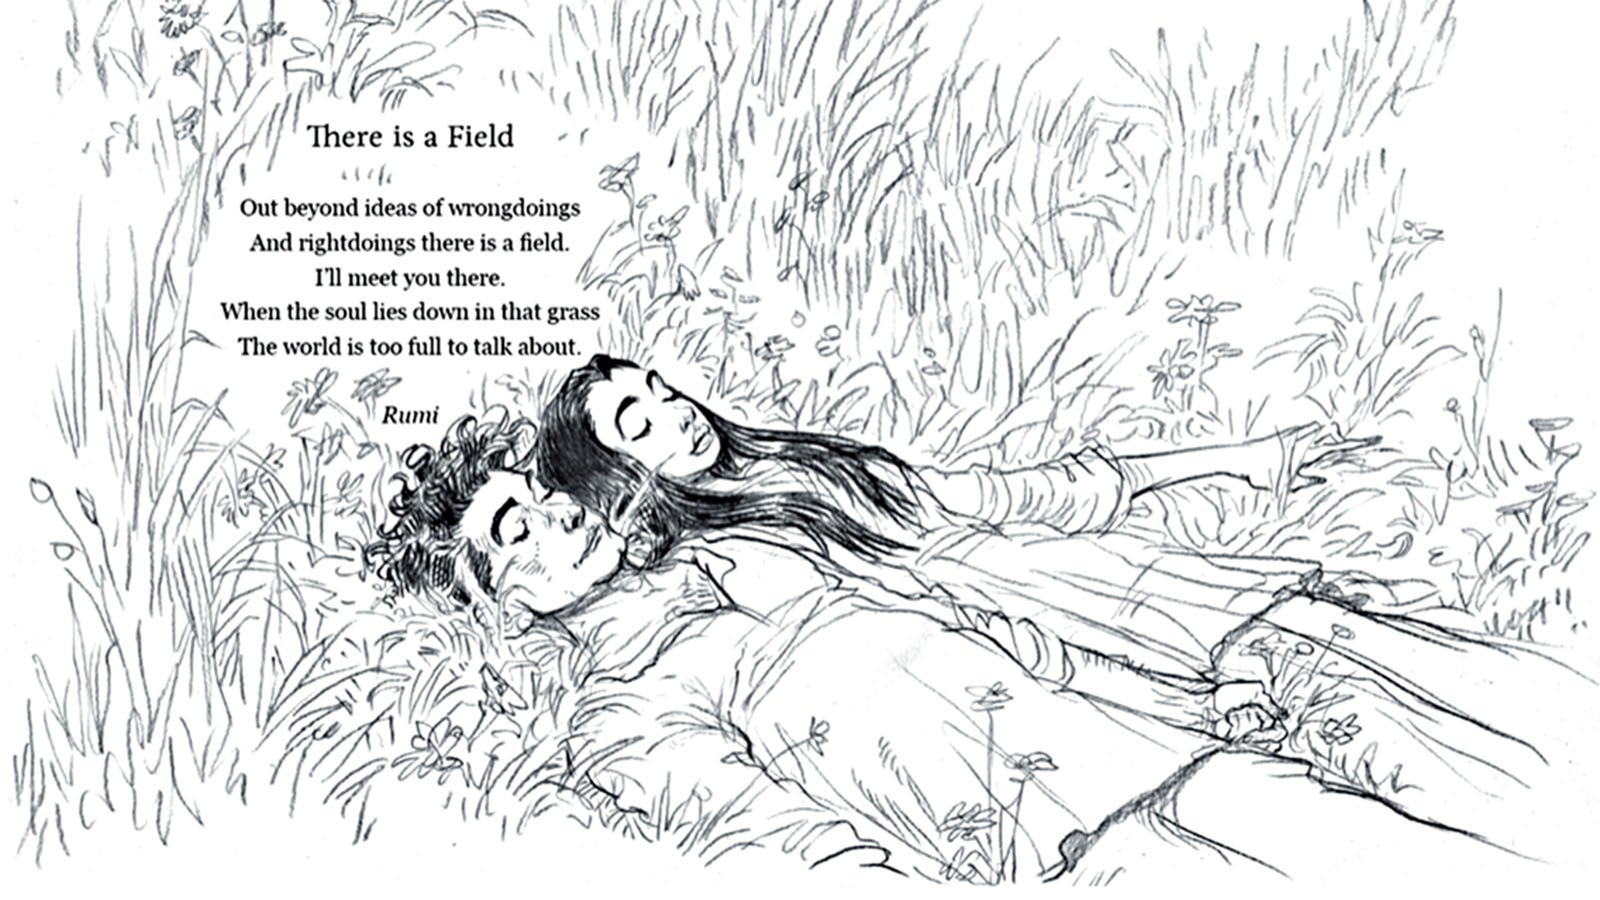 Illustration of There is a field from Poems to Live Your Life By